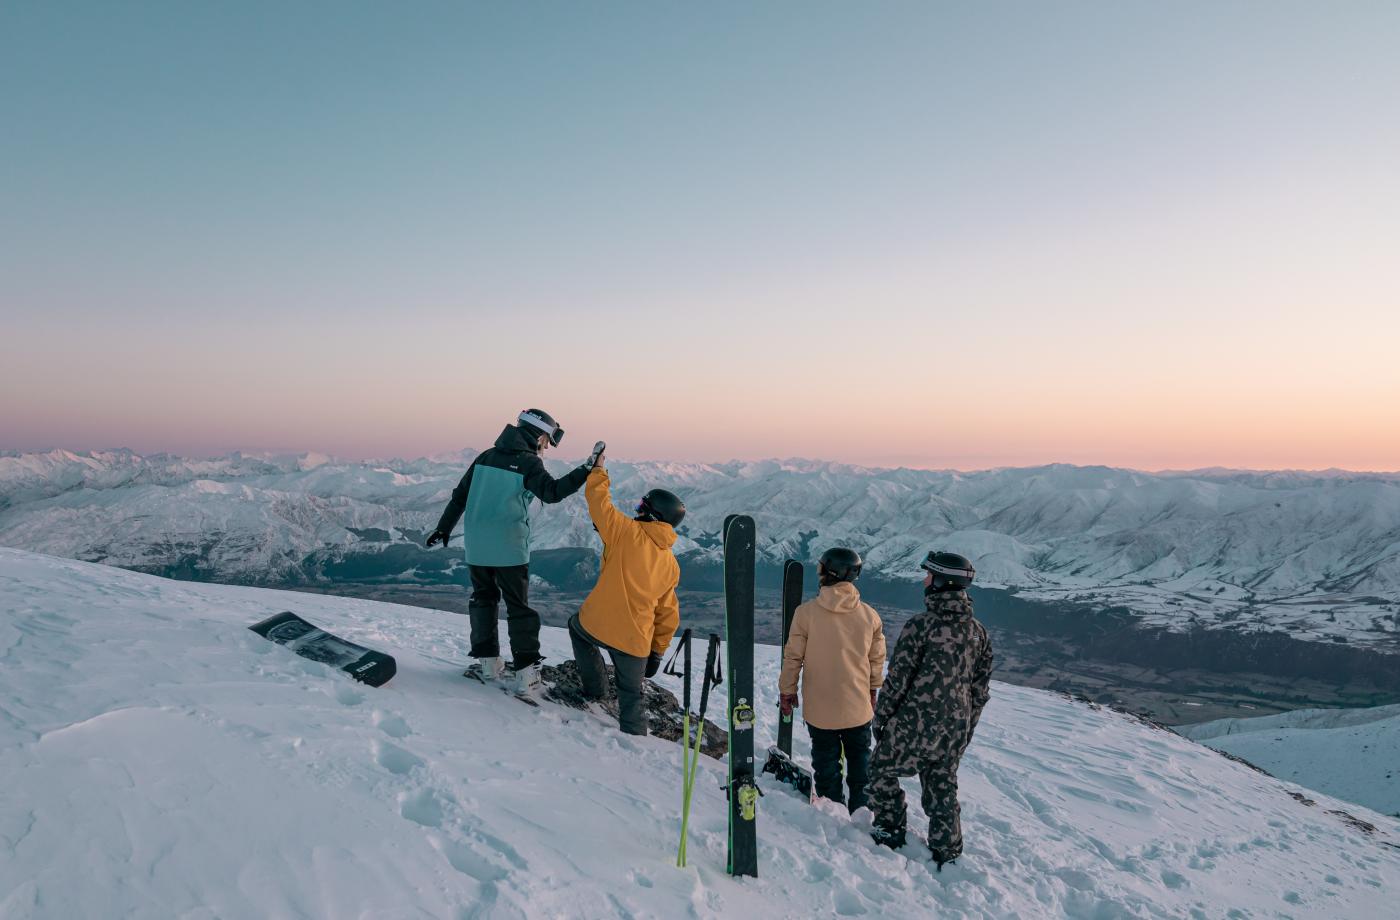 Group of skiers and snowboarders at the top of The Remarkables